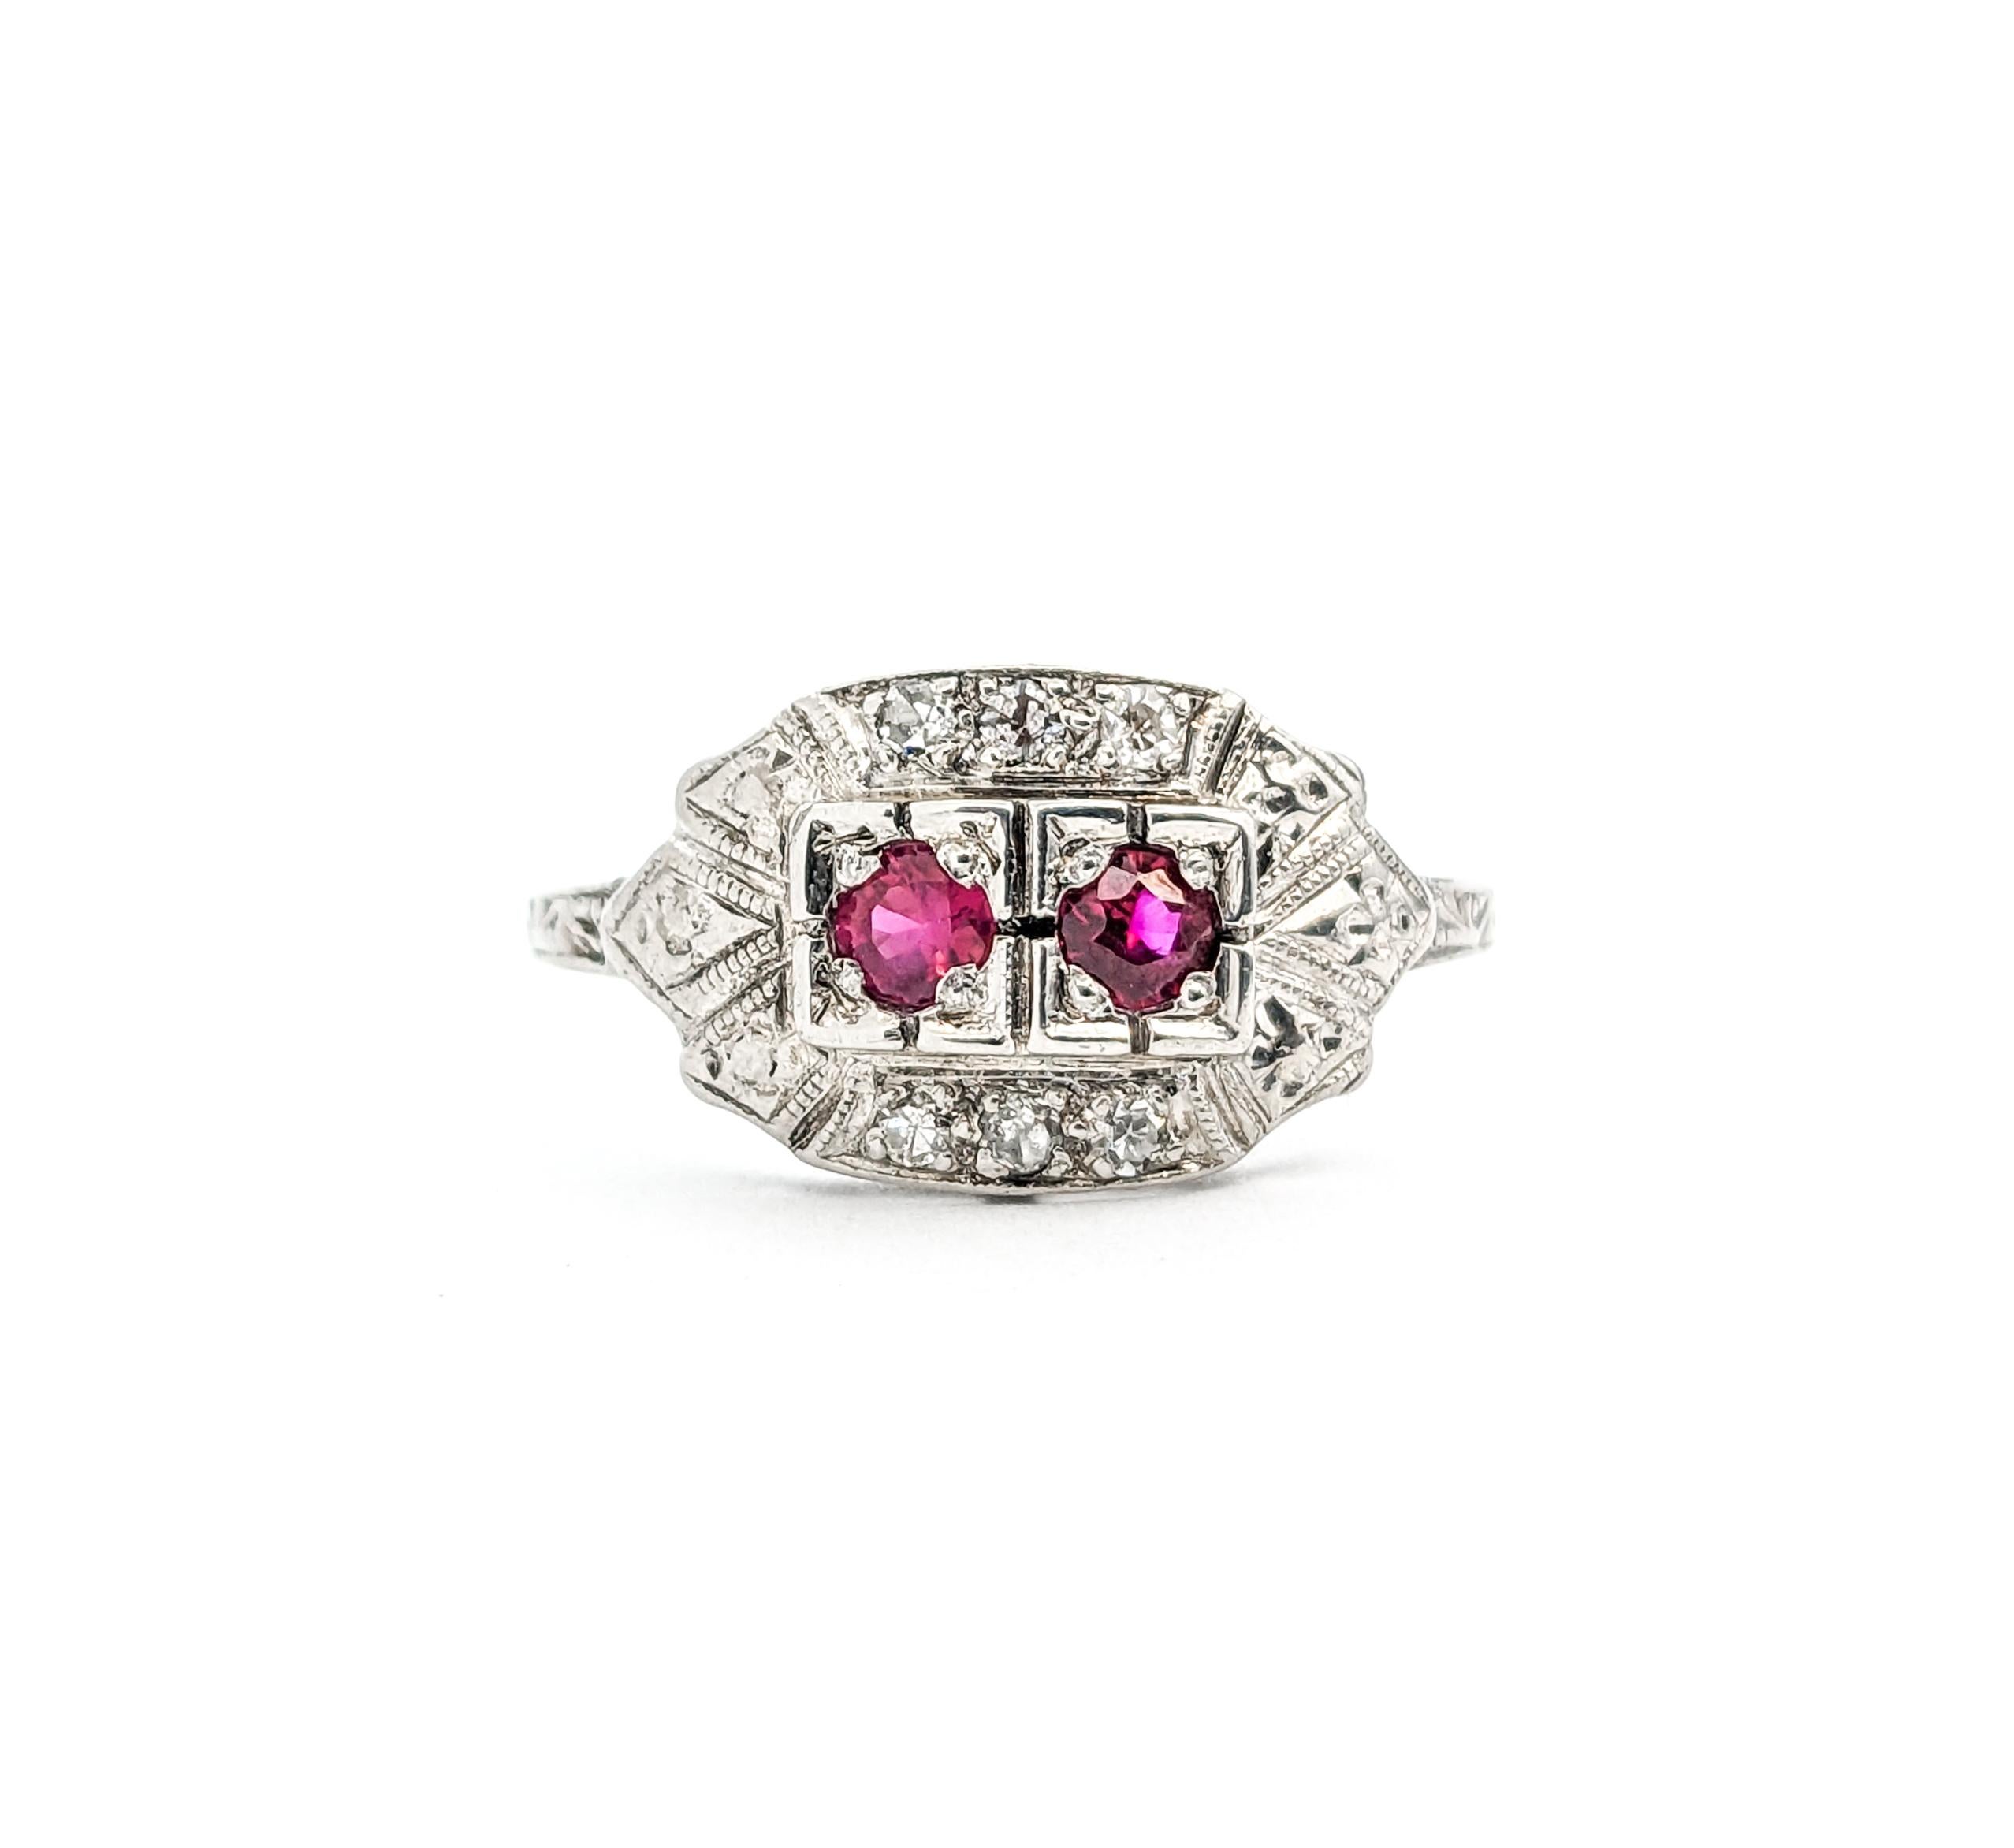 Antique Art Deco Ruby & Diamond Ring in Platinum

Presenting a remarkable Antique Ruby Ring, exquisitely crafted in Platinum. This elegant piece is adorned with a .06ctw Single Cut Diamonds centerpiece, harmoniously paired with .20ctw of vibrant